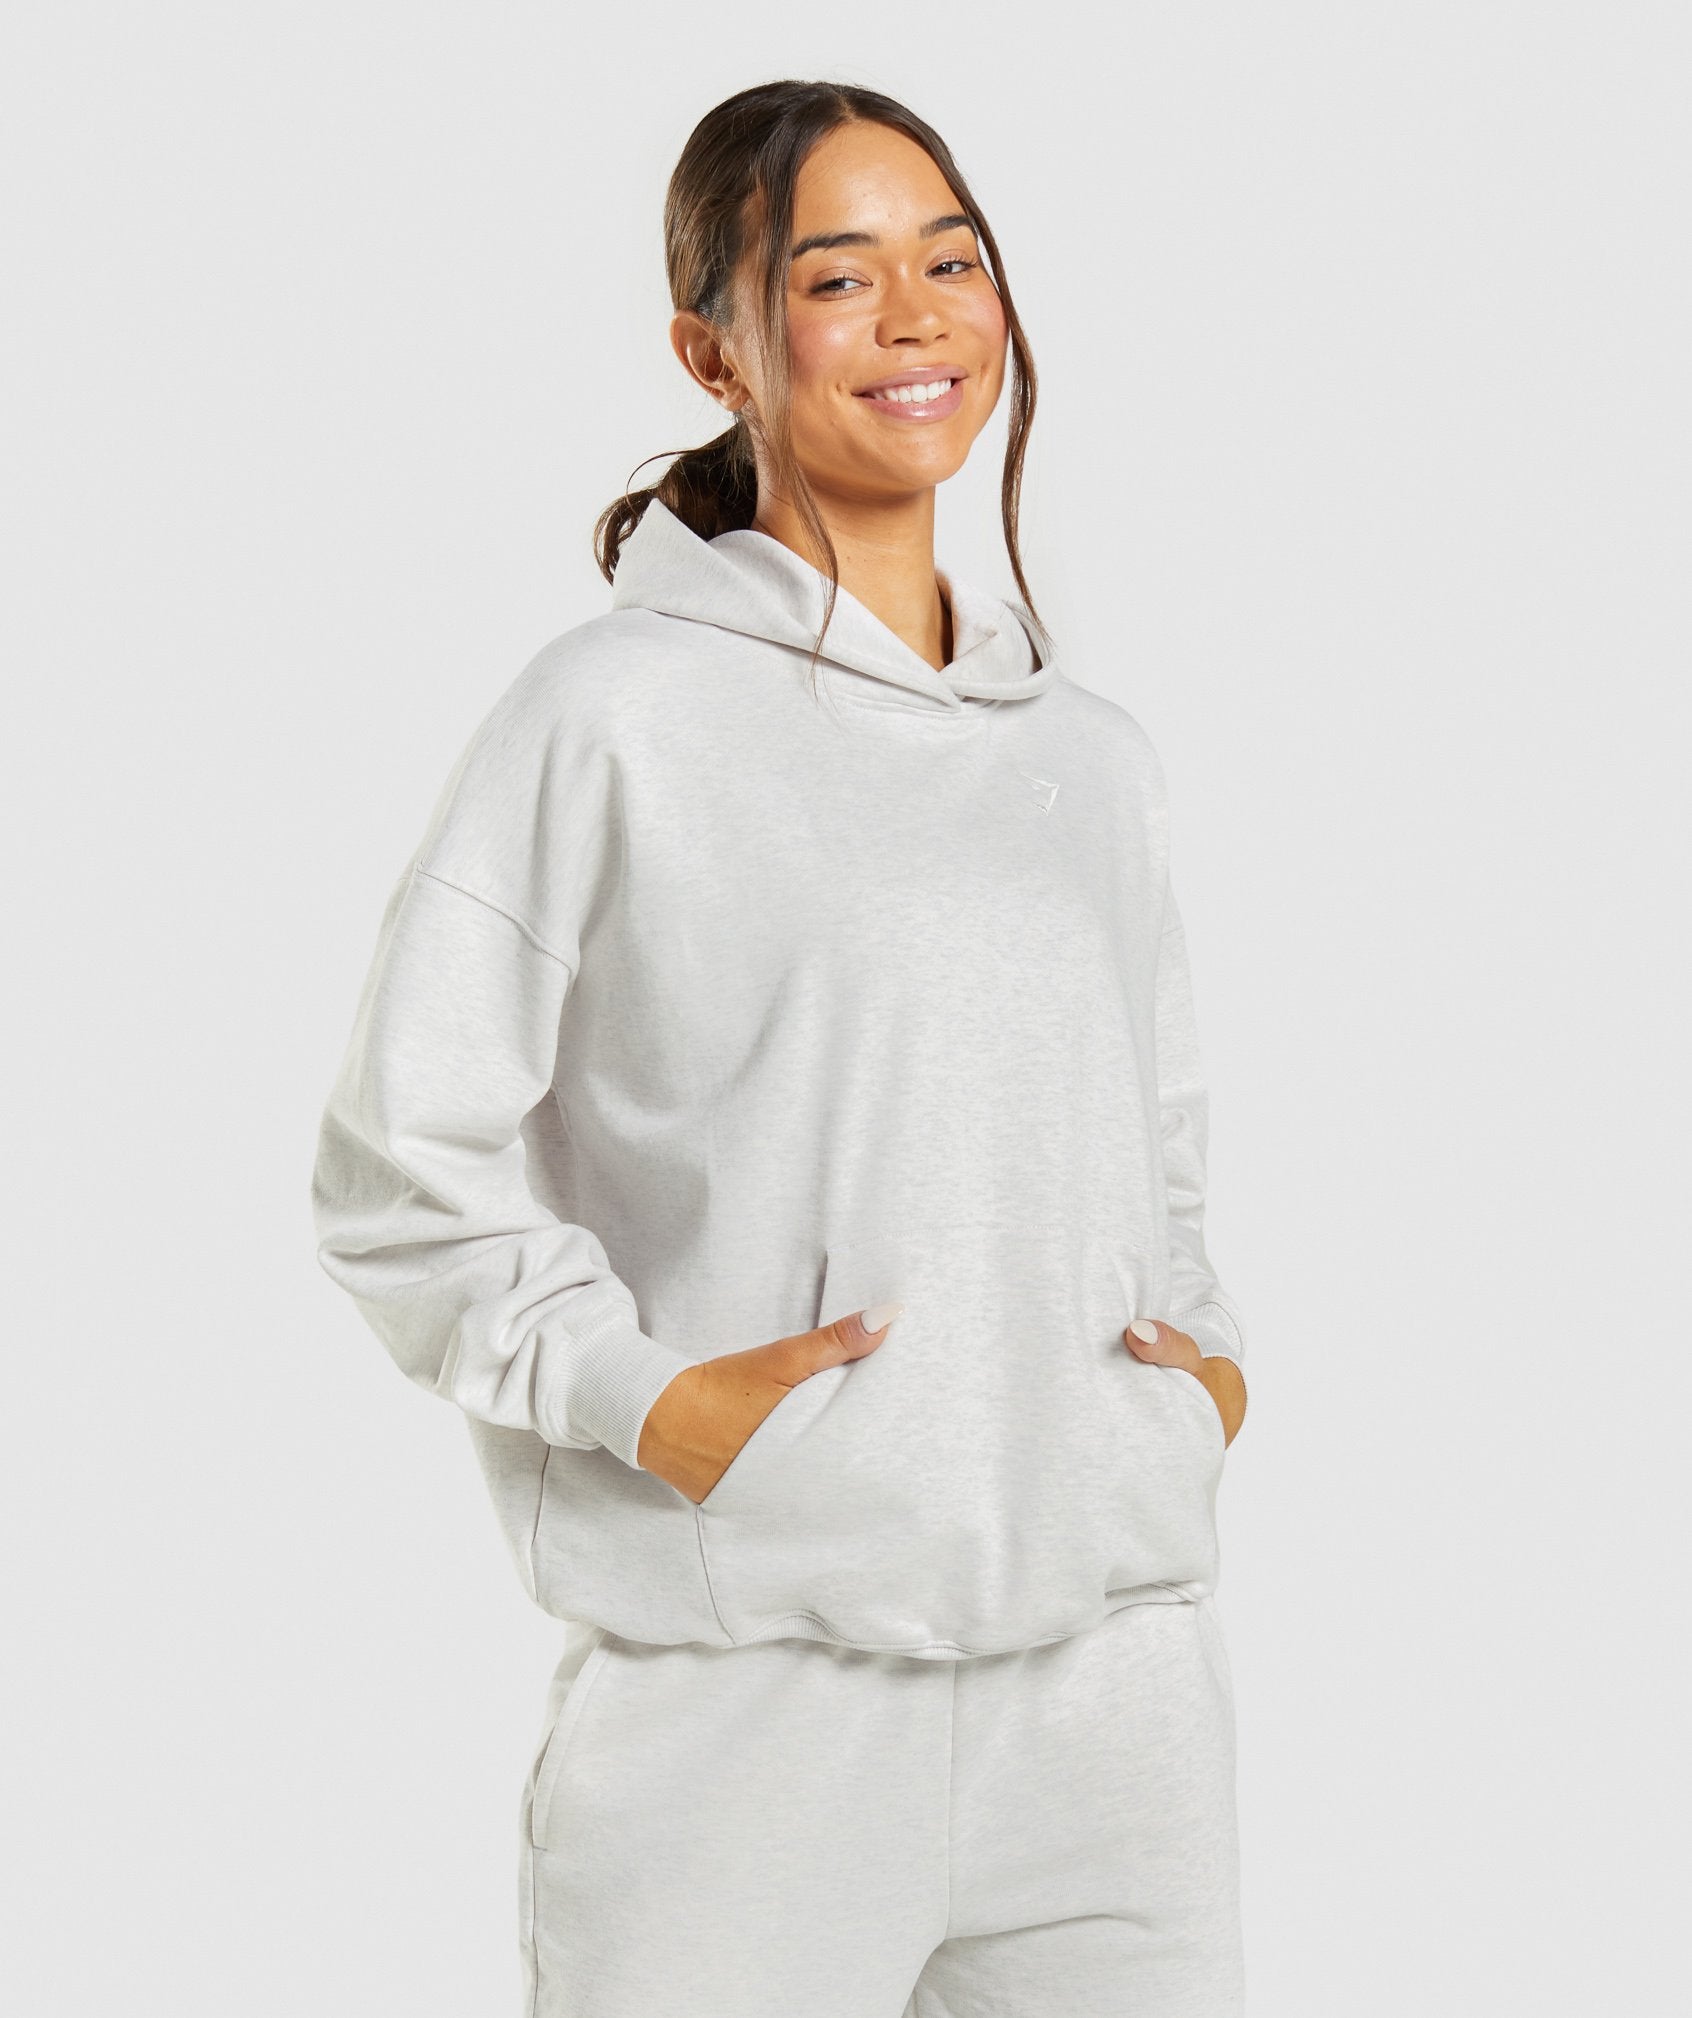 Rest Day Sweats Hoodie product image 1